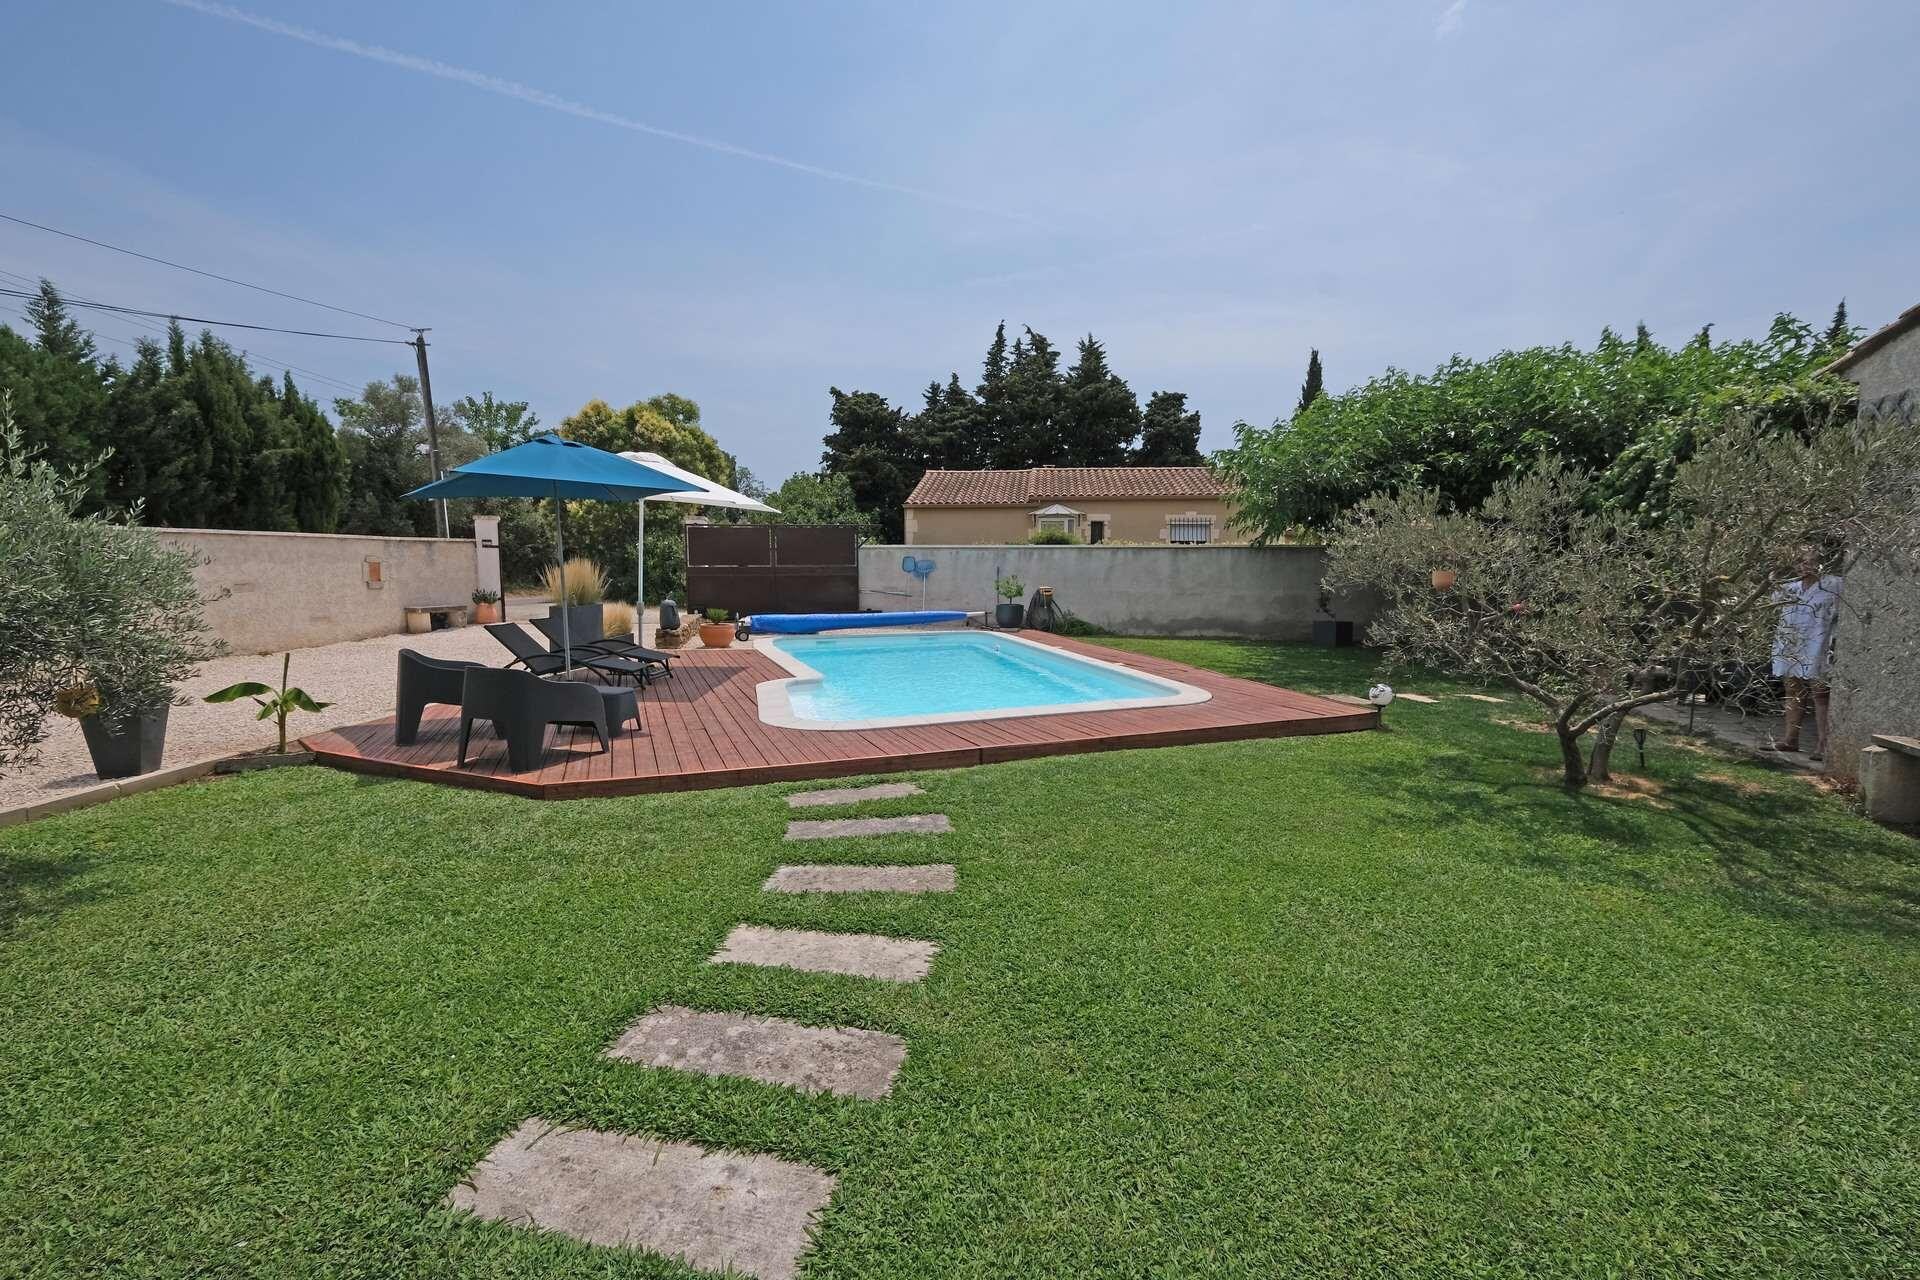 Property Image 2 - very pleasant house with swimming pool in mouriès, near Les baux de provence in the alpilles – 6 people